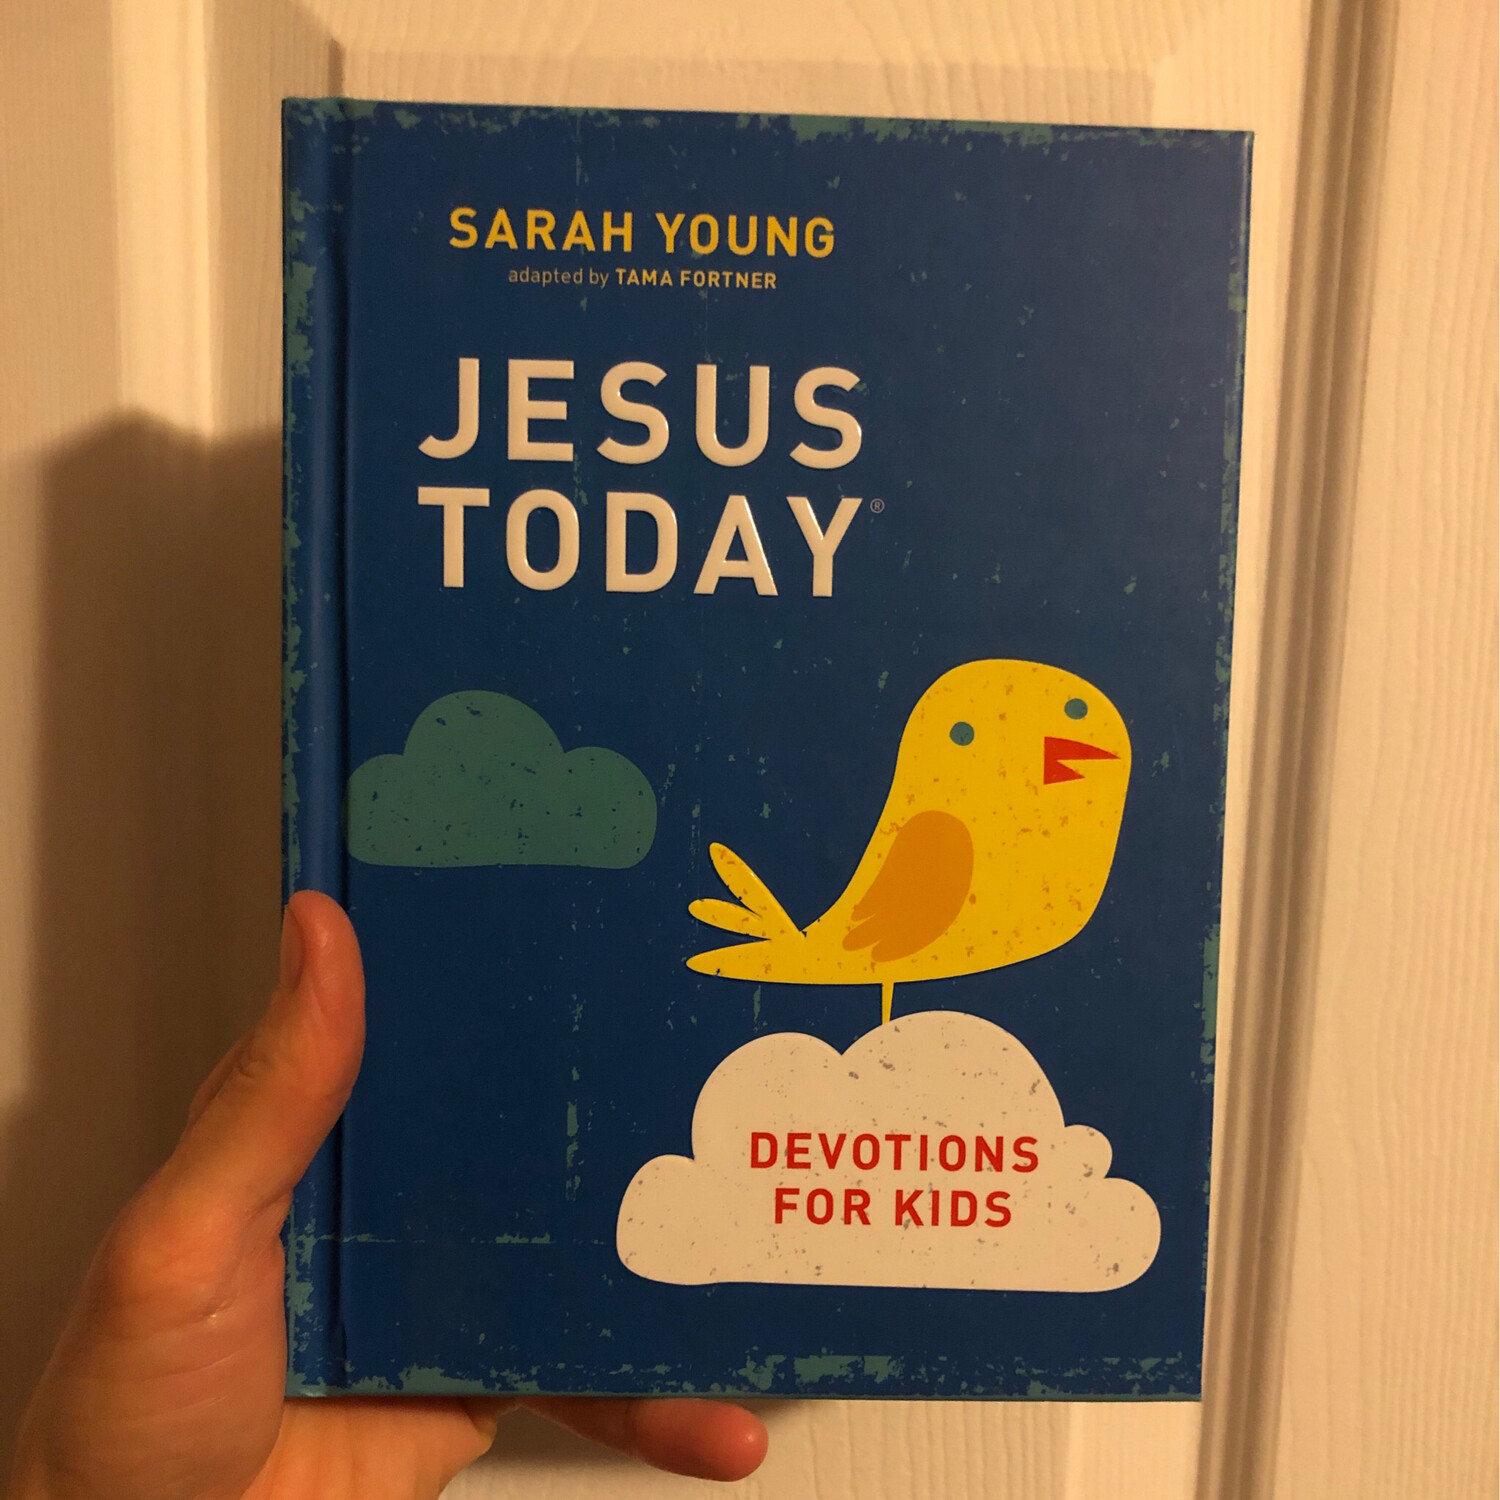 Jesus Always: Devotions for Kids by Sarah Young